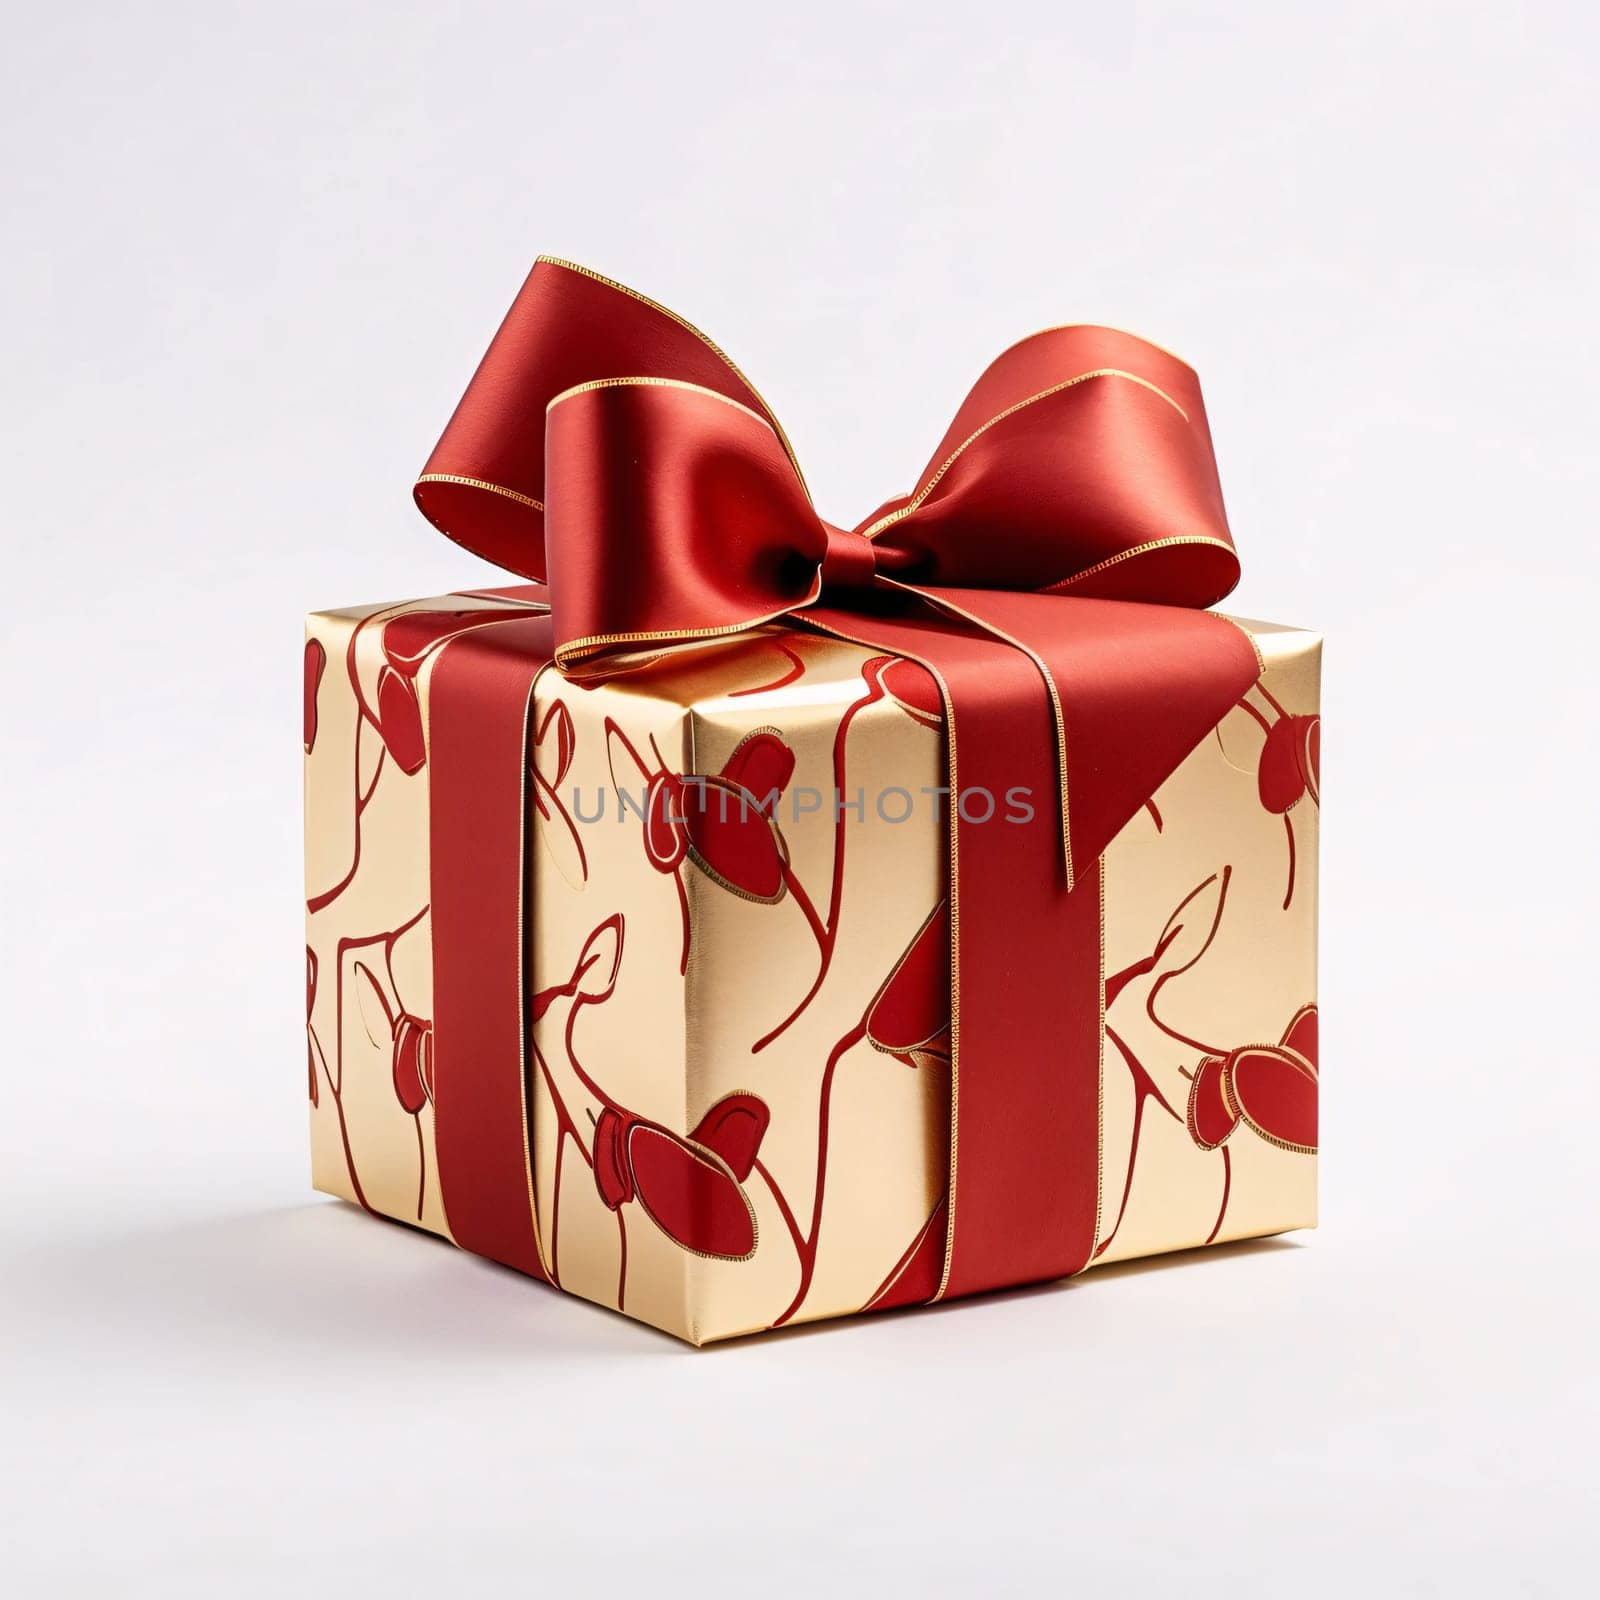 Gift in good paper with red bow white background. Gifts as a day symbol of present and love. A time of falling in love and love.